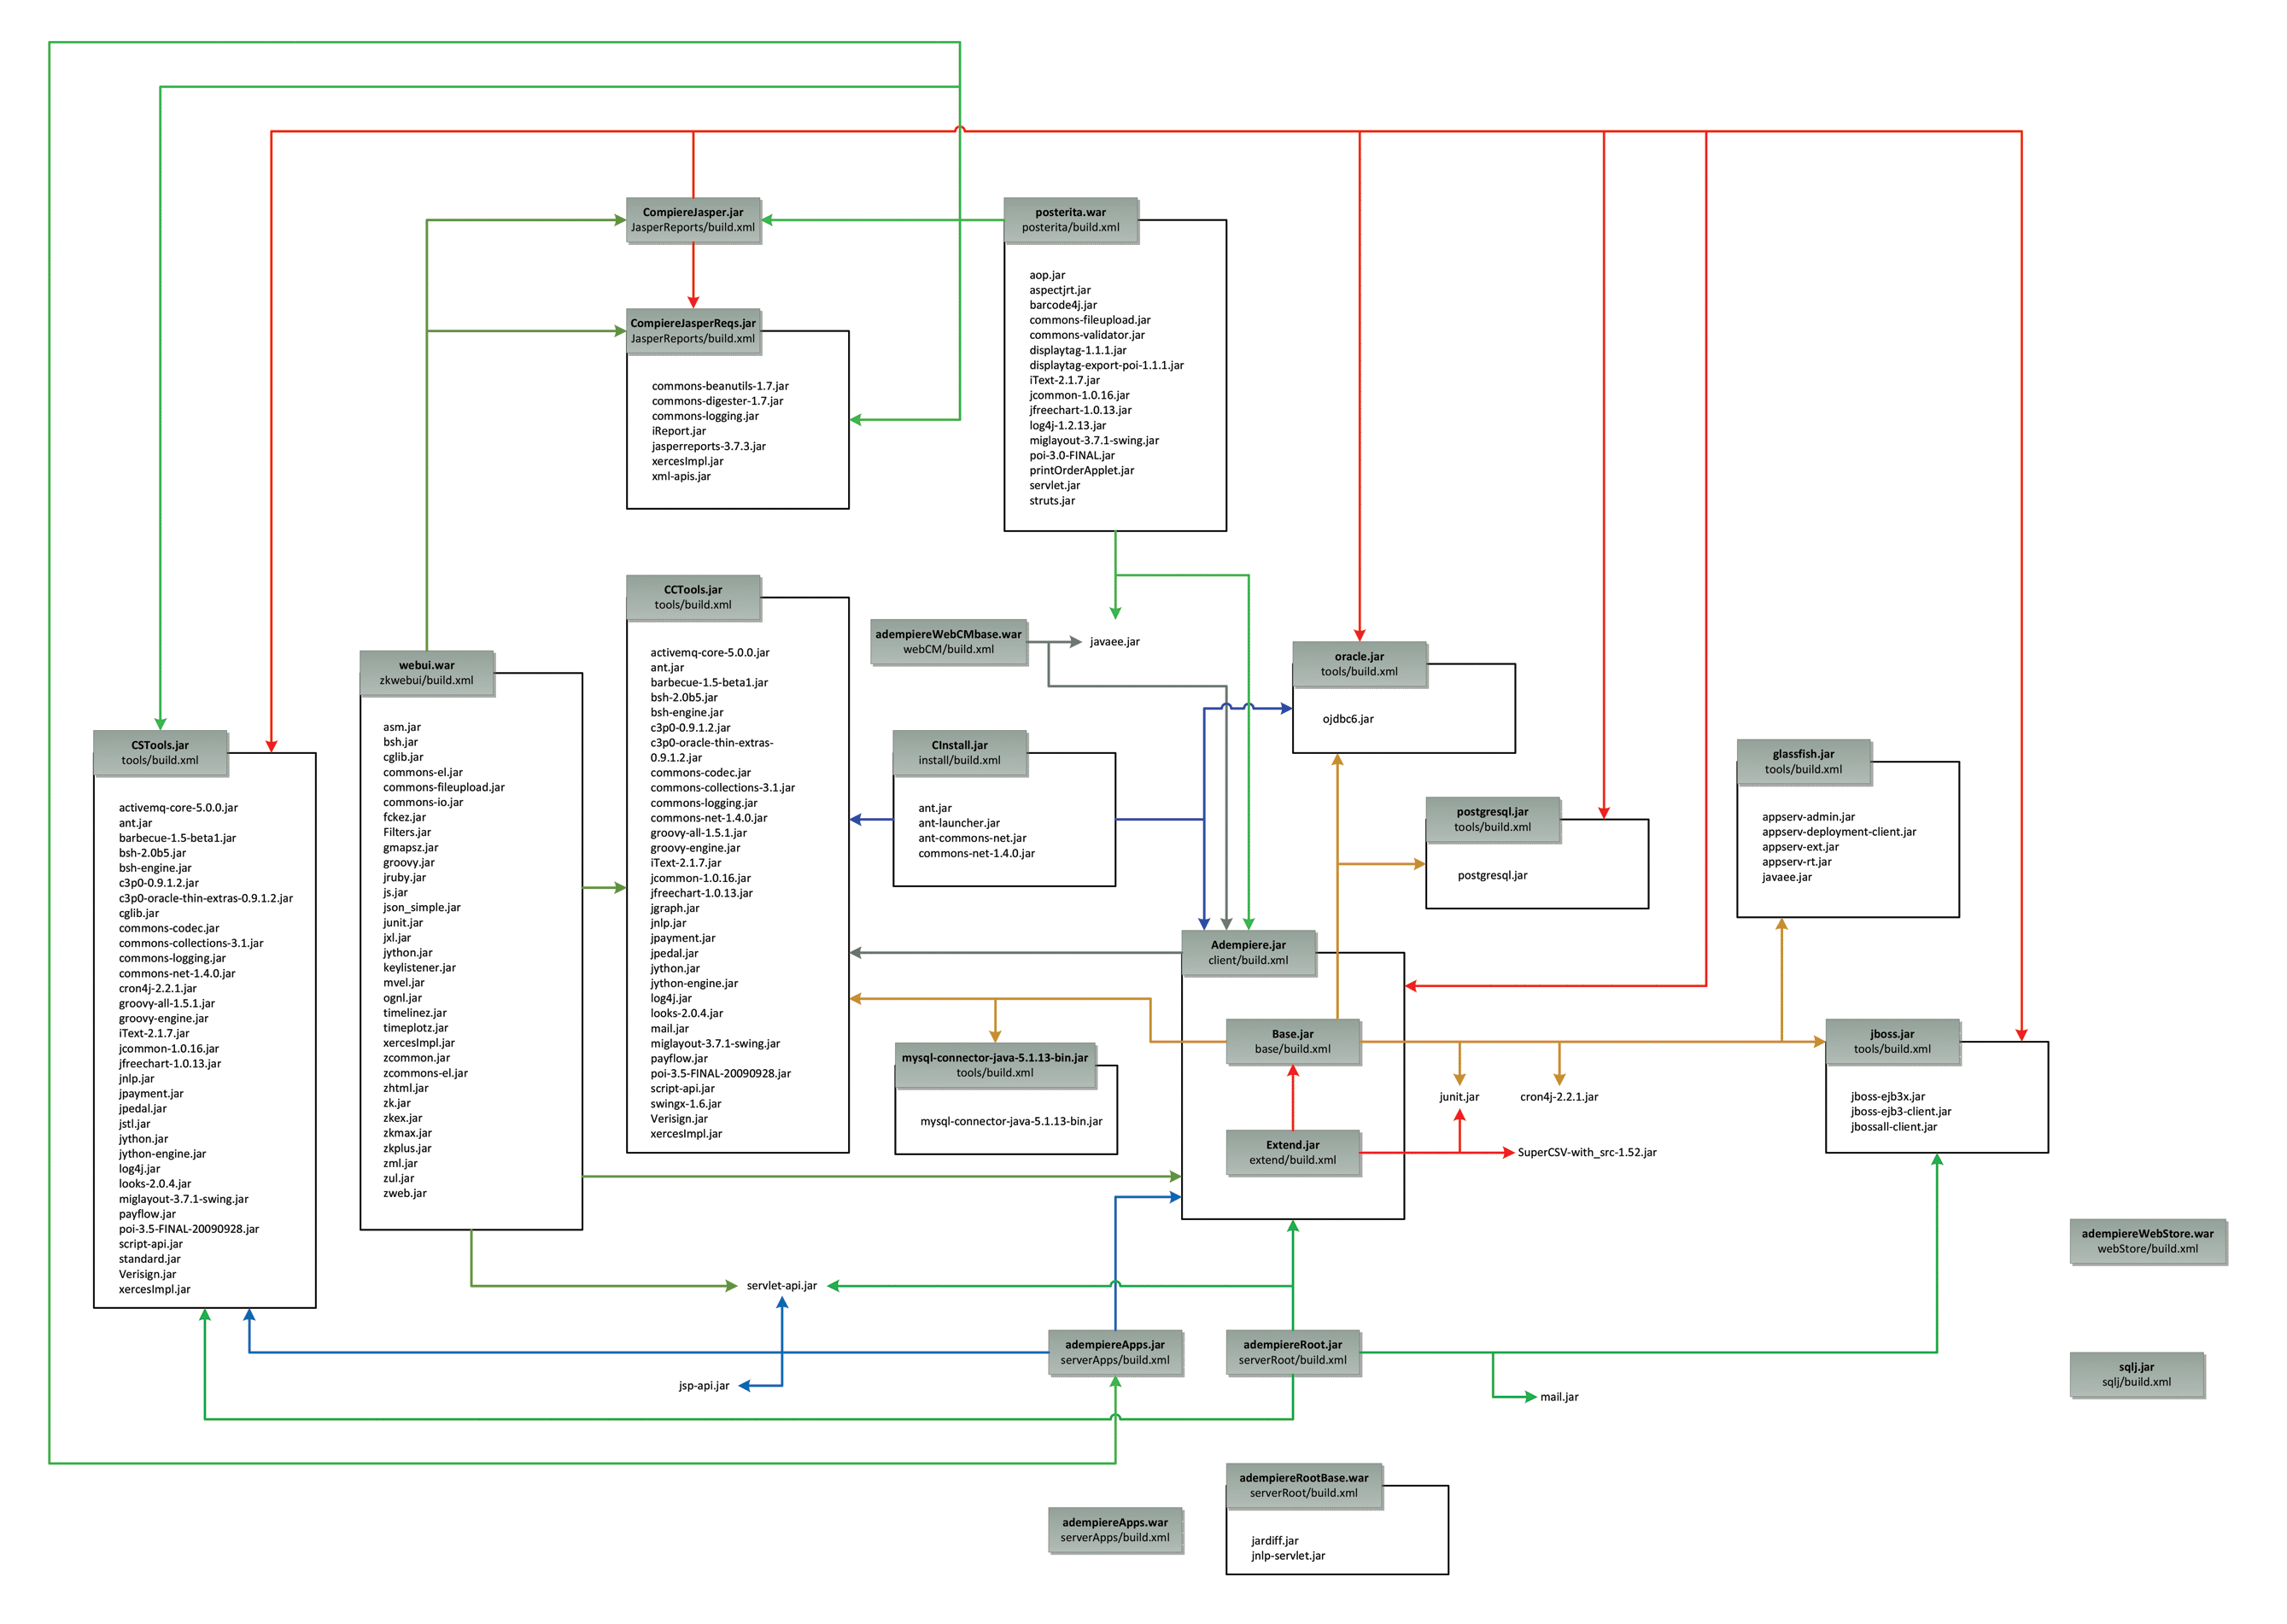 ADempiere dependency graph.png